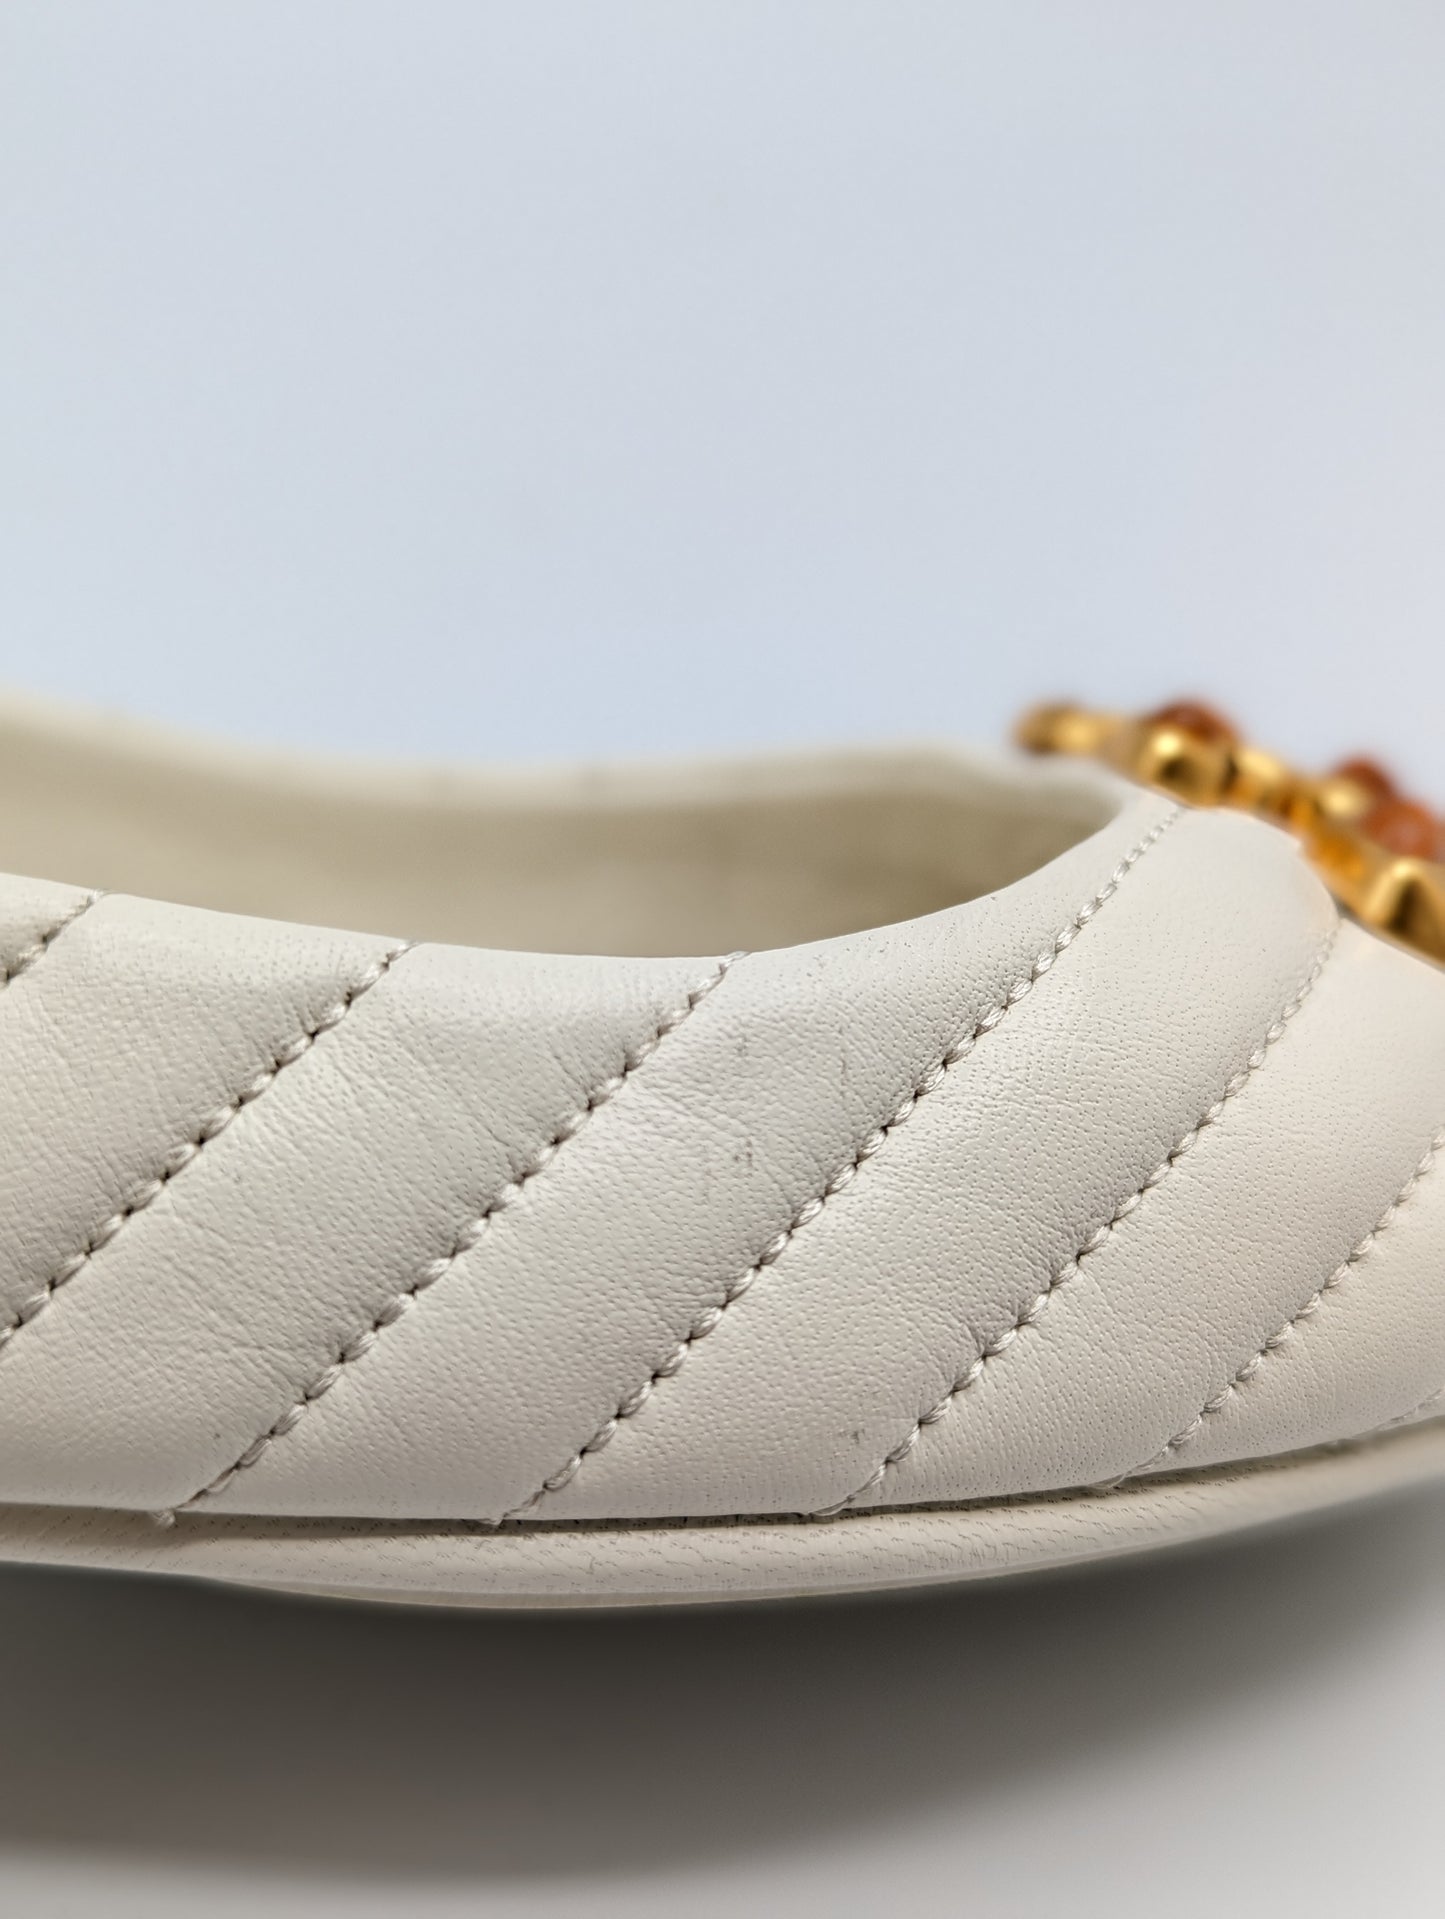 Tory Burch Cream Queens Day Flats Size 7